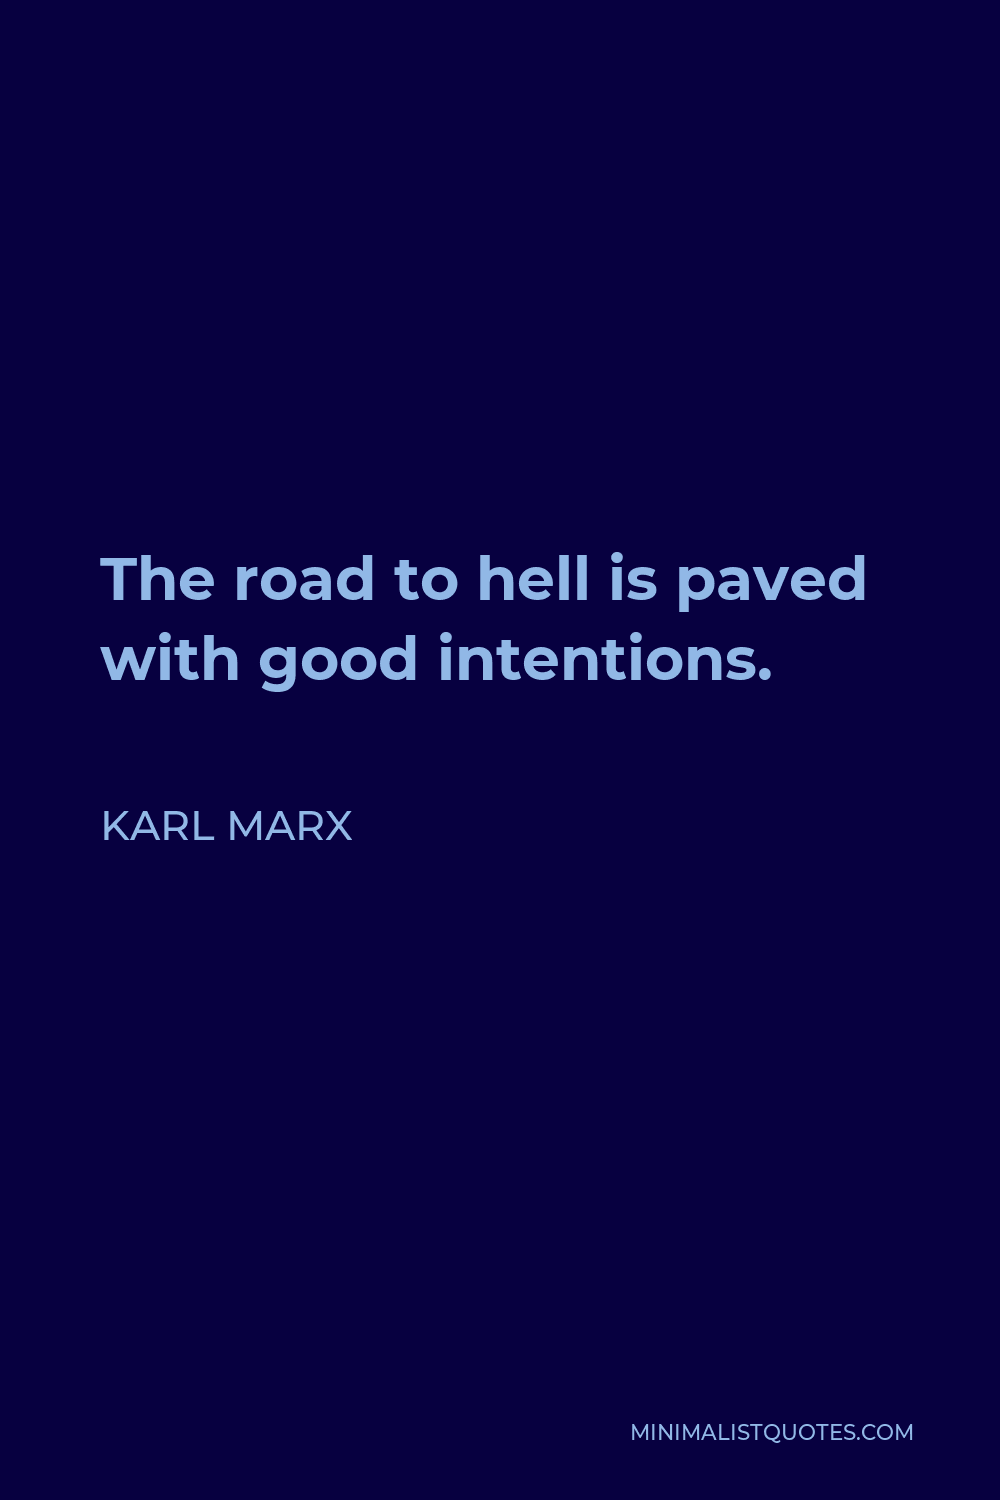 Karl Marx Quote - The road to hell is paved with good intentions.